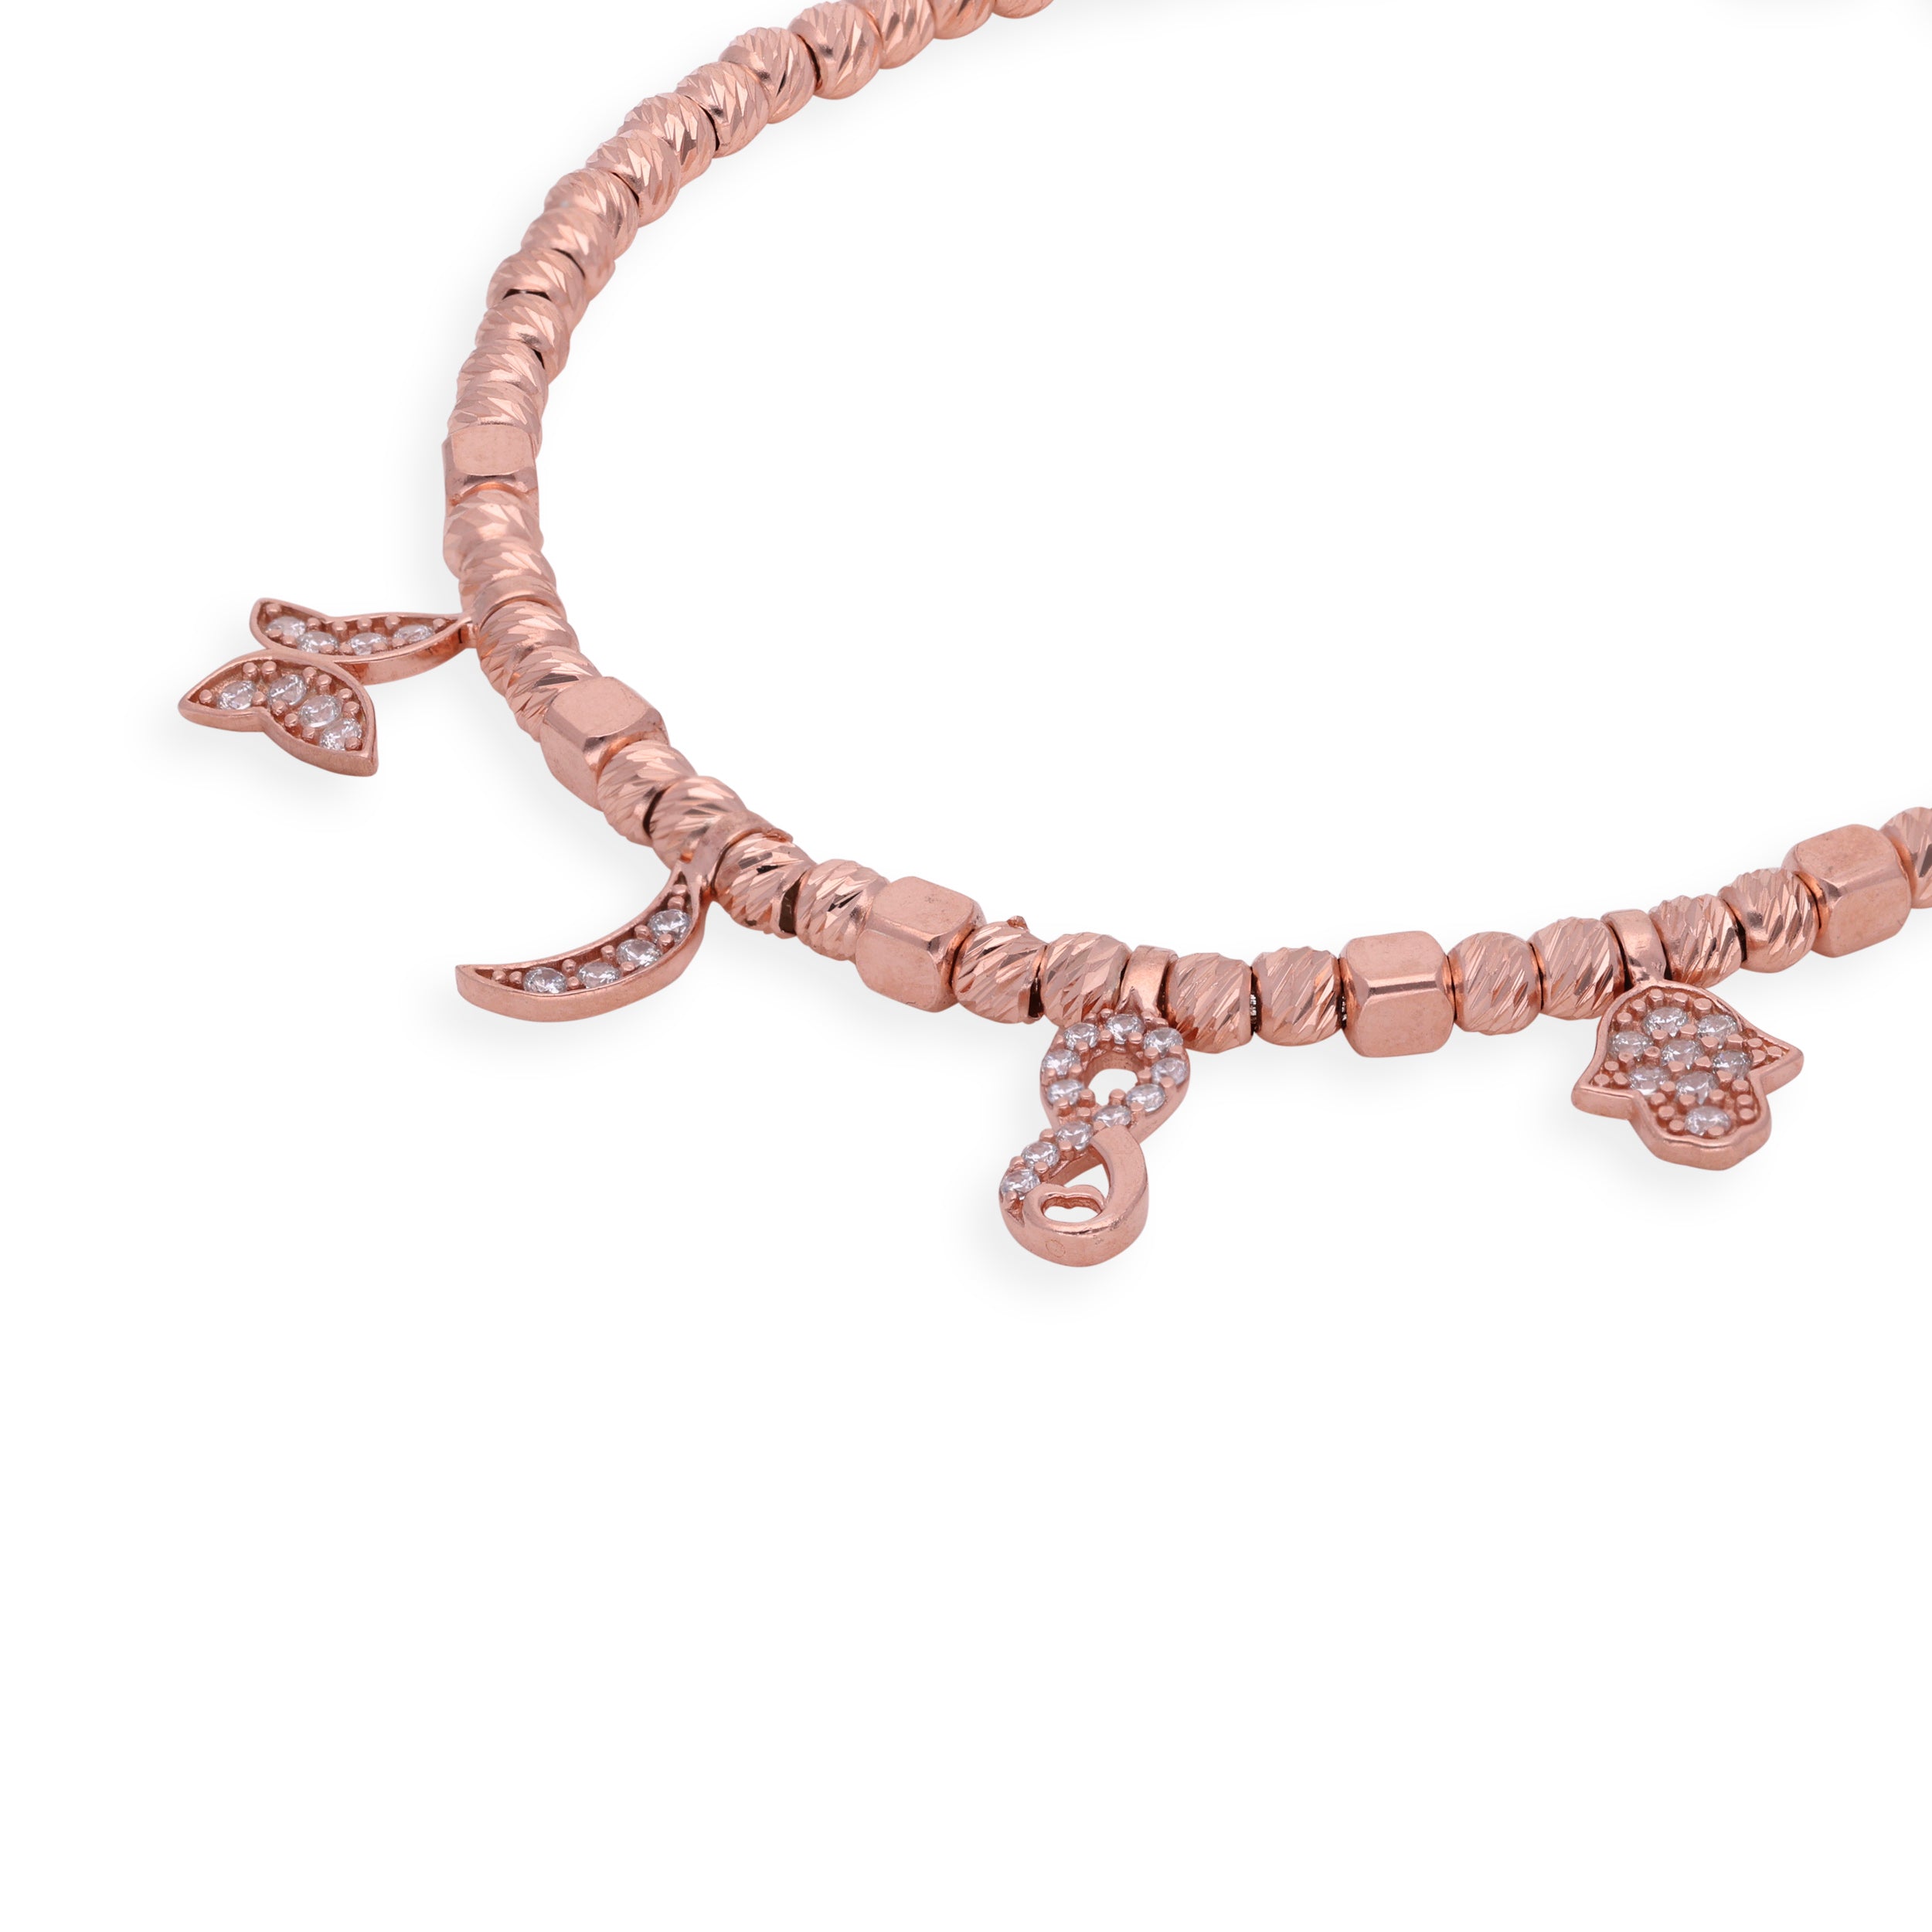 Enchanted Rose Gold Celestial Charm Bracelet with Diamond Accents | SKU:0003109960